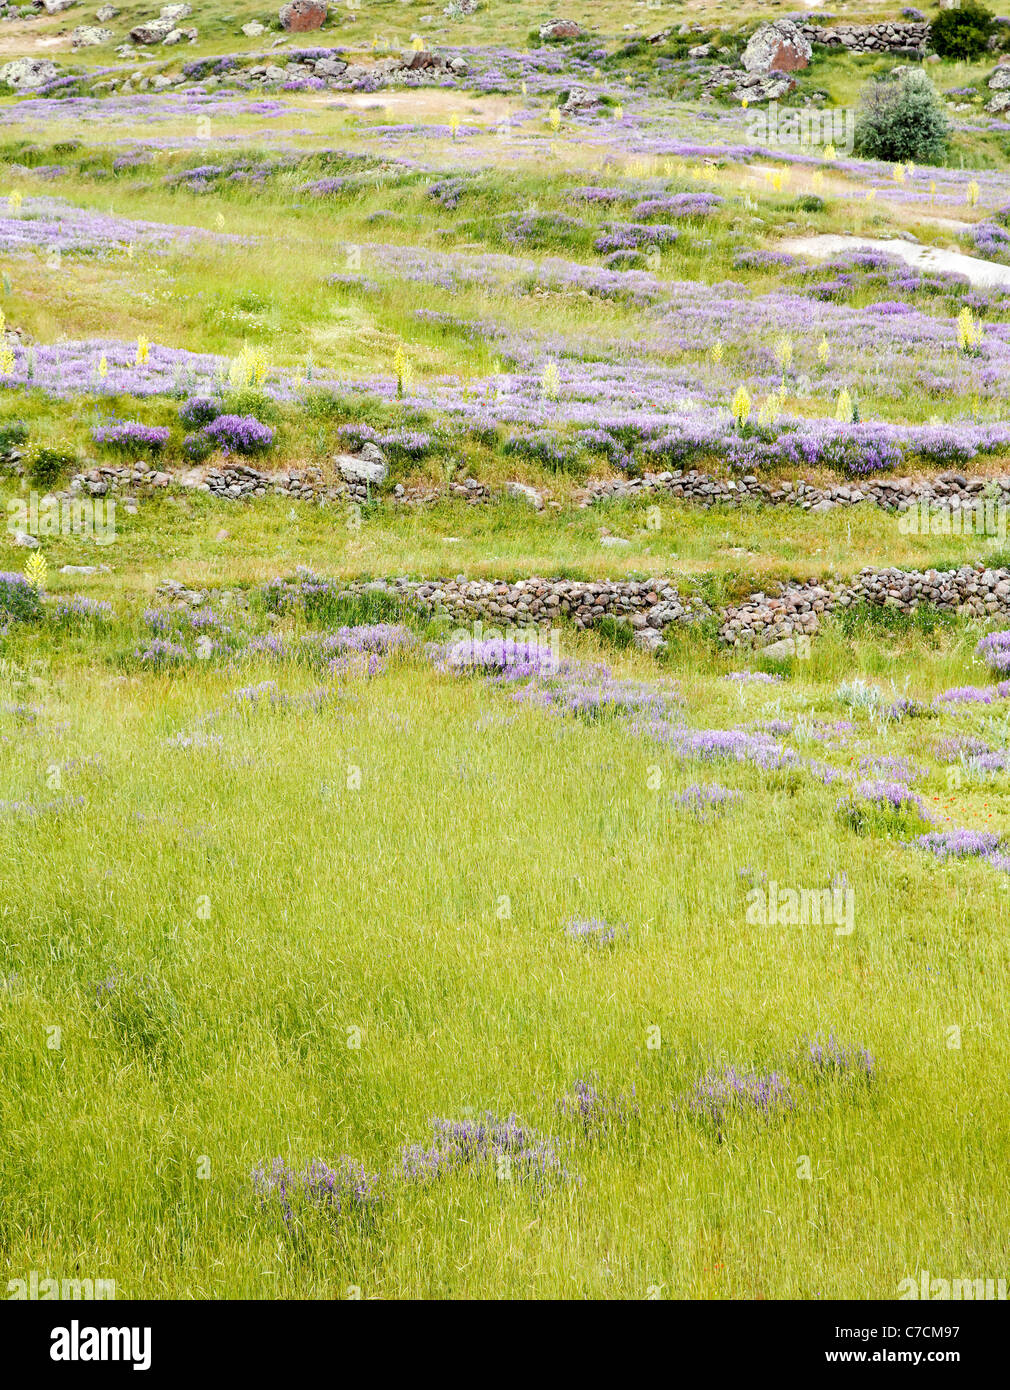 Background of lush green grass on a hillside of lava rock with sprinkling of lavenders, violets, blue bells, dry walling, primro Stock Photo